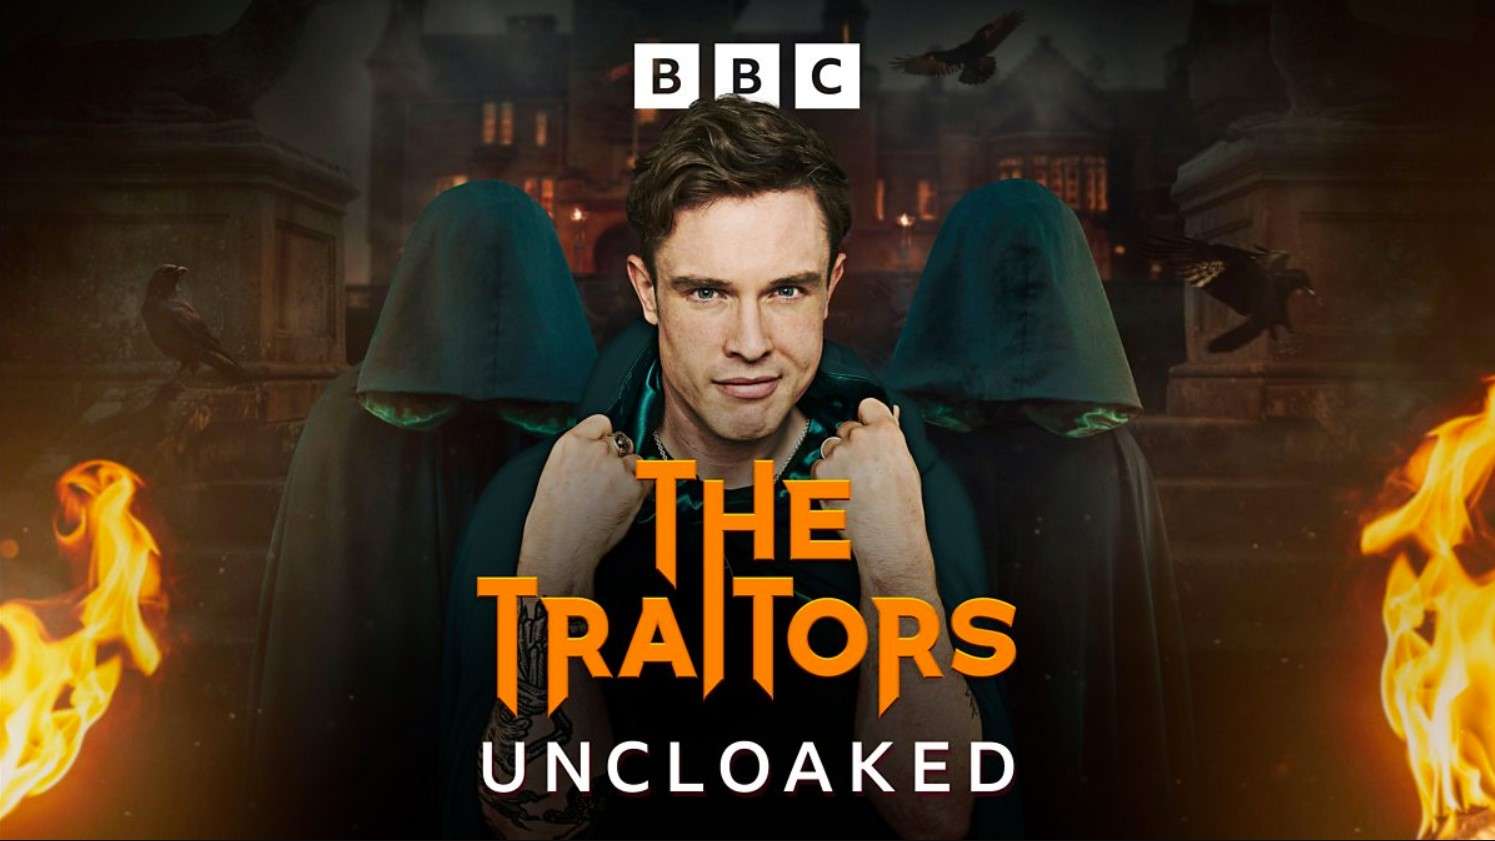 The Traitors Uncloaked